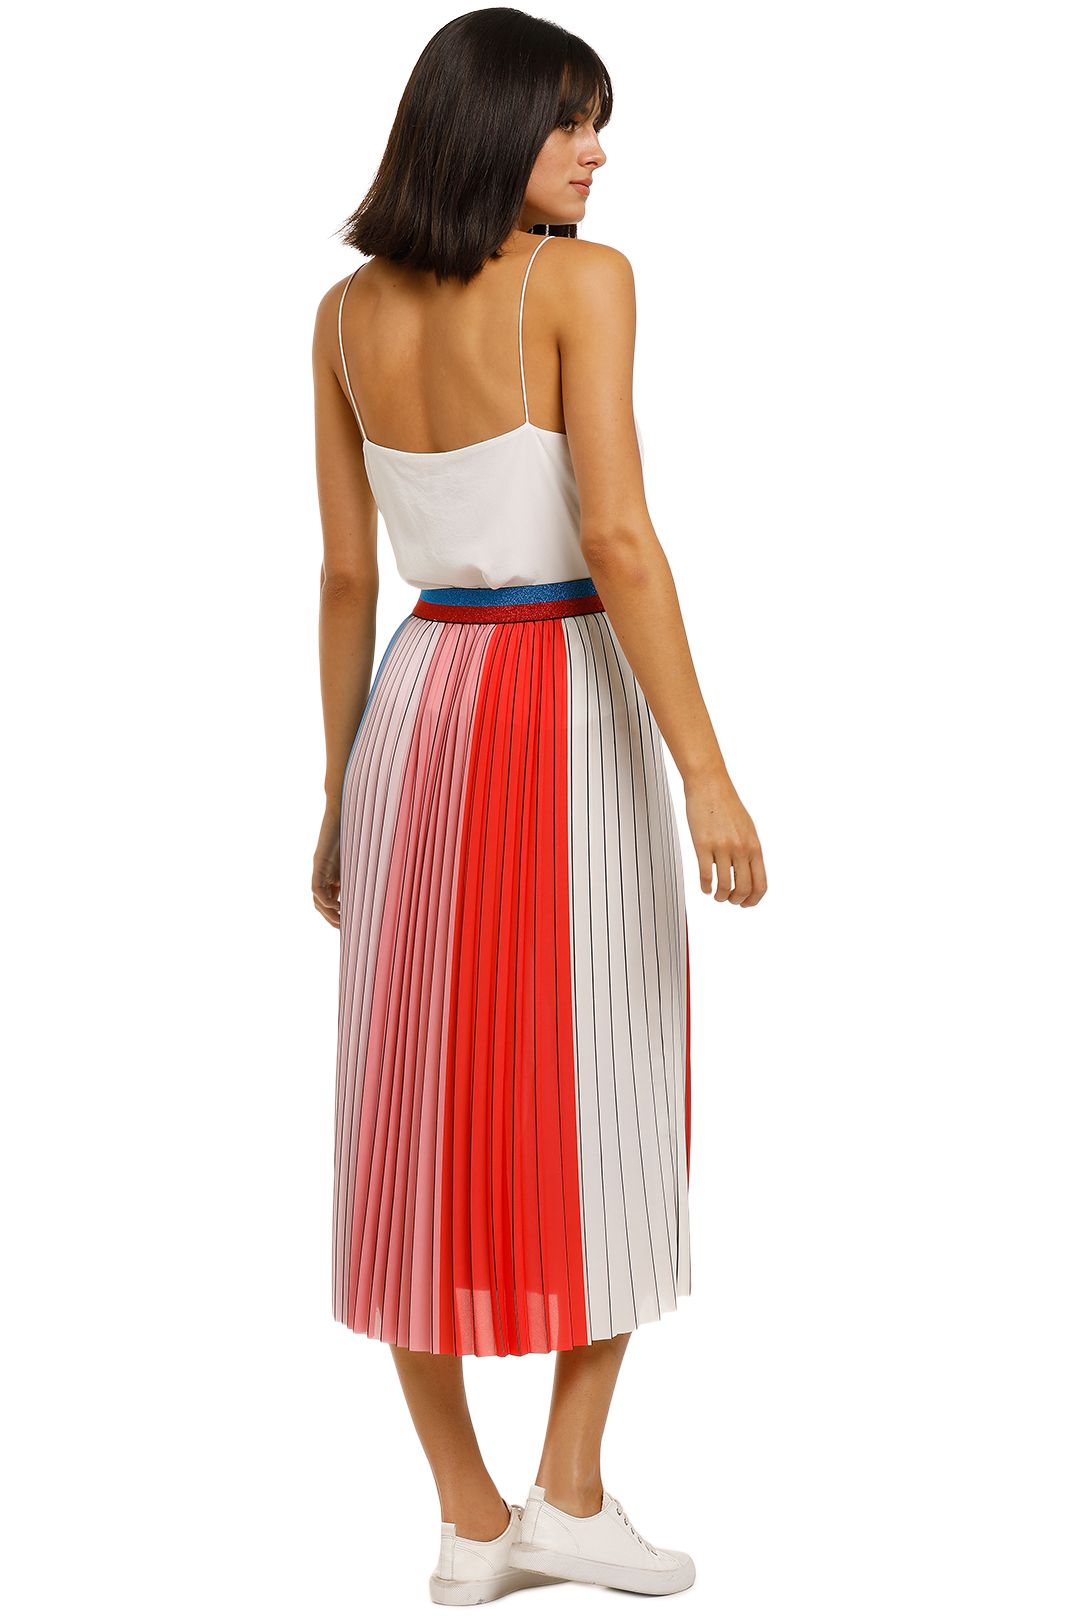 Hire Let Them Pleat Cake Skirt | Coop By Trelise Cooper